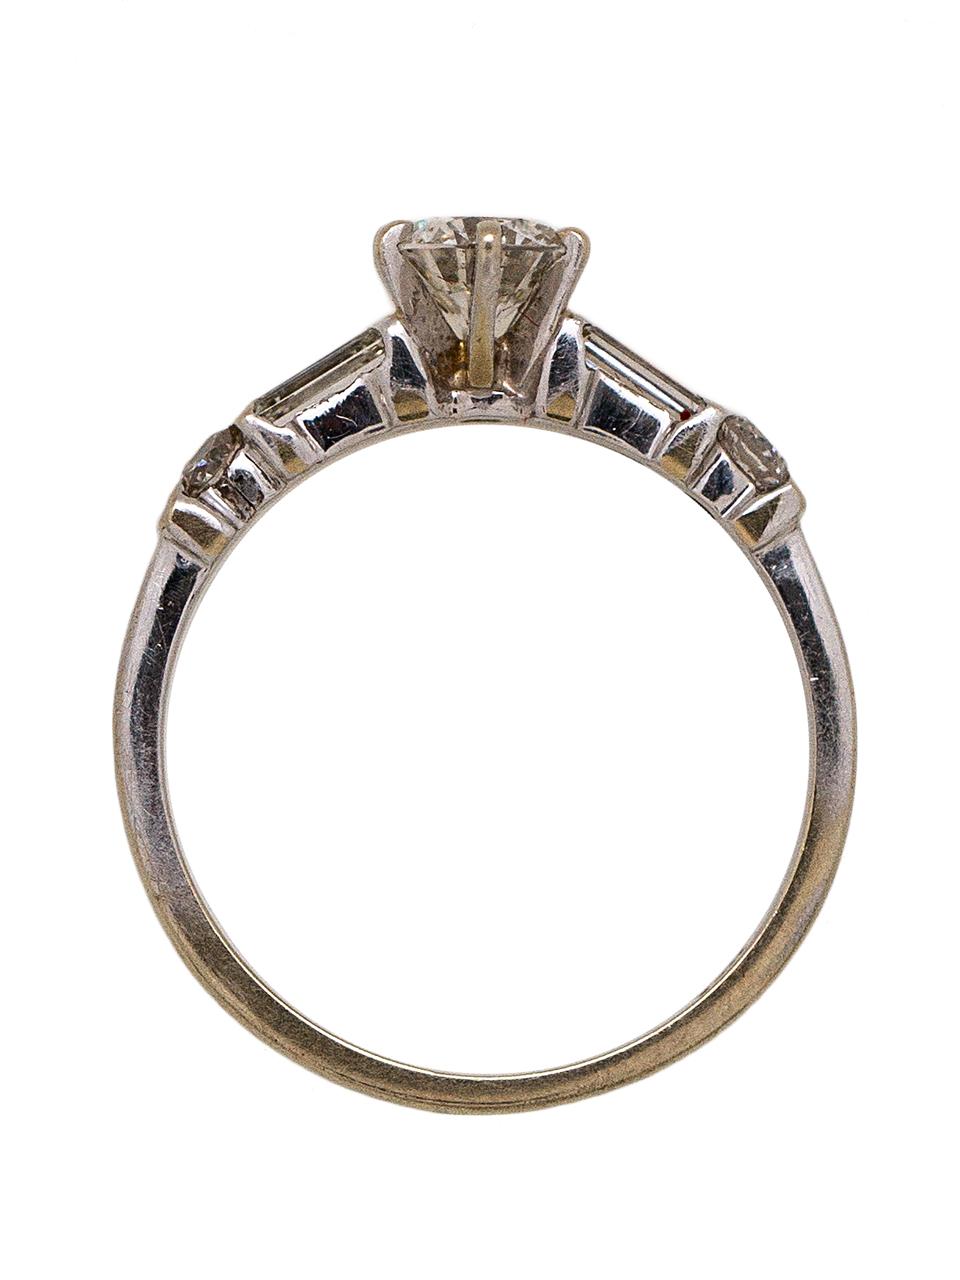 Vintage Engagement Ring 14 Karat White Gold 0.50 Carat G-SI2, circa 1960s In Excellent Condition For Sale In West Hollywood, CA